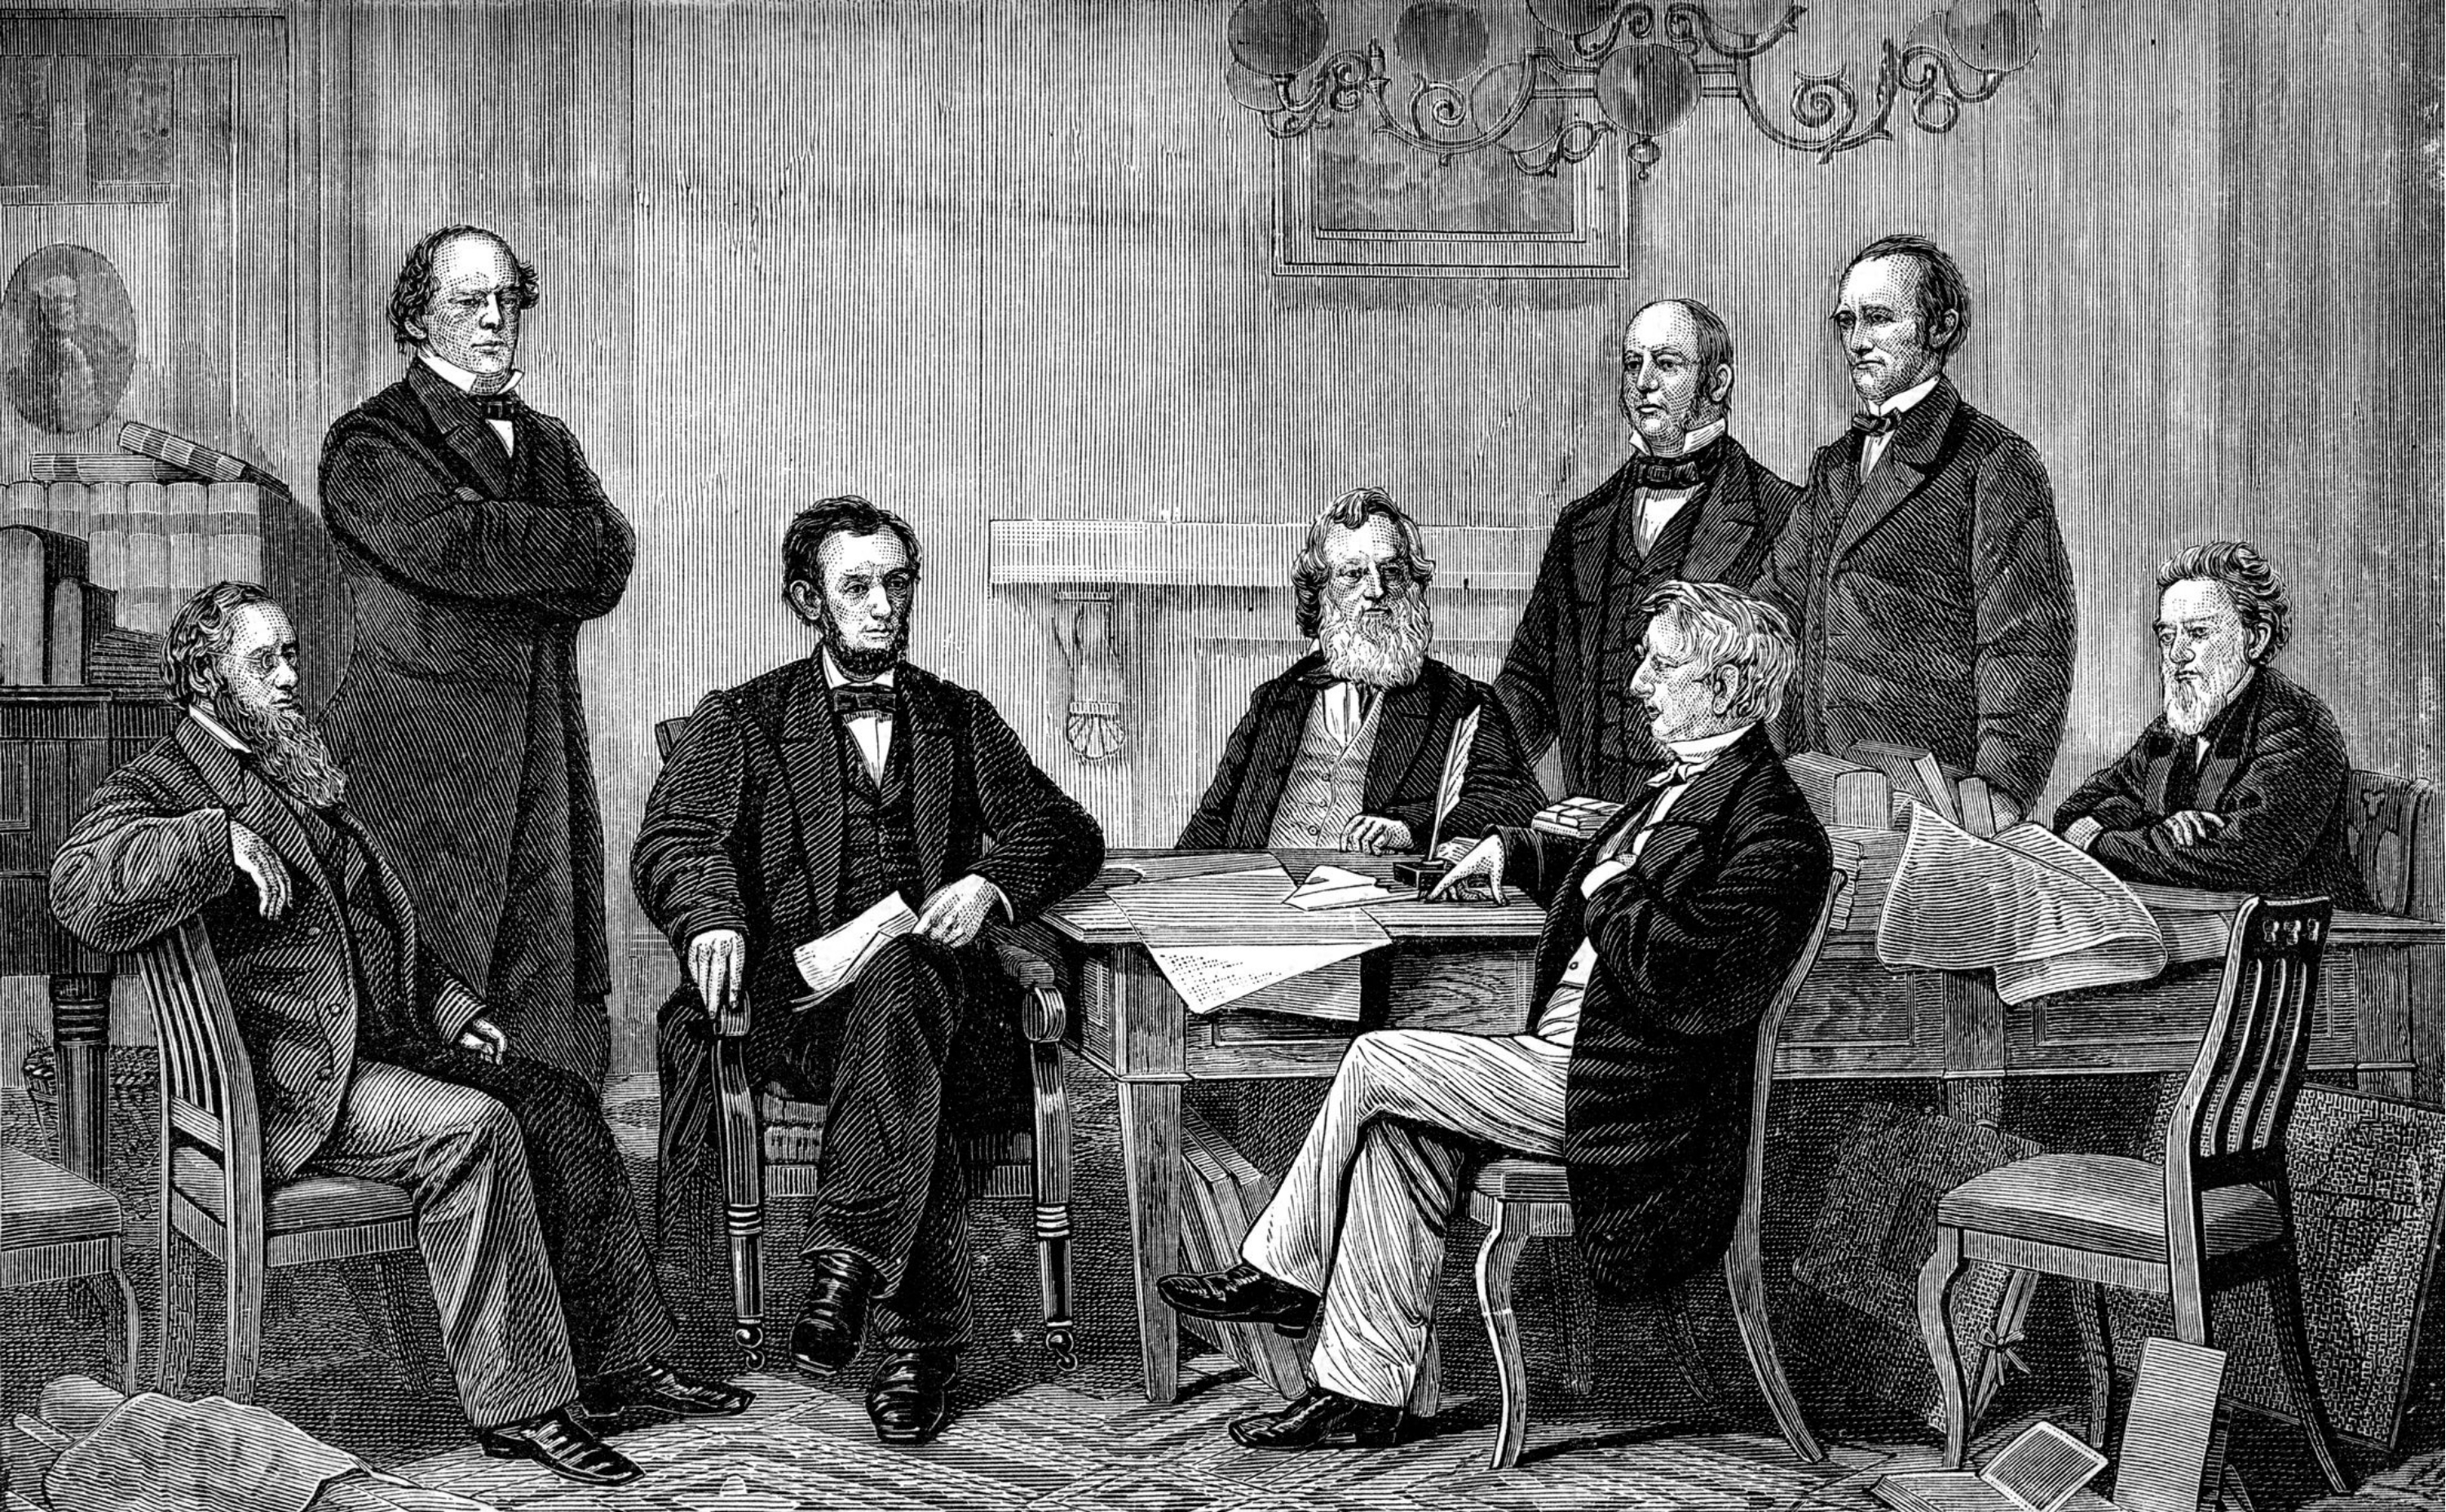 Rendering of Abe Lincoln with other officials